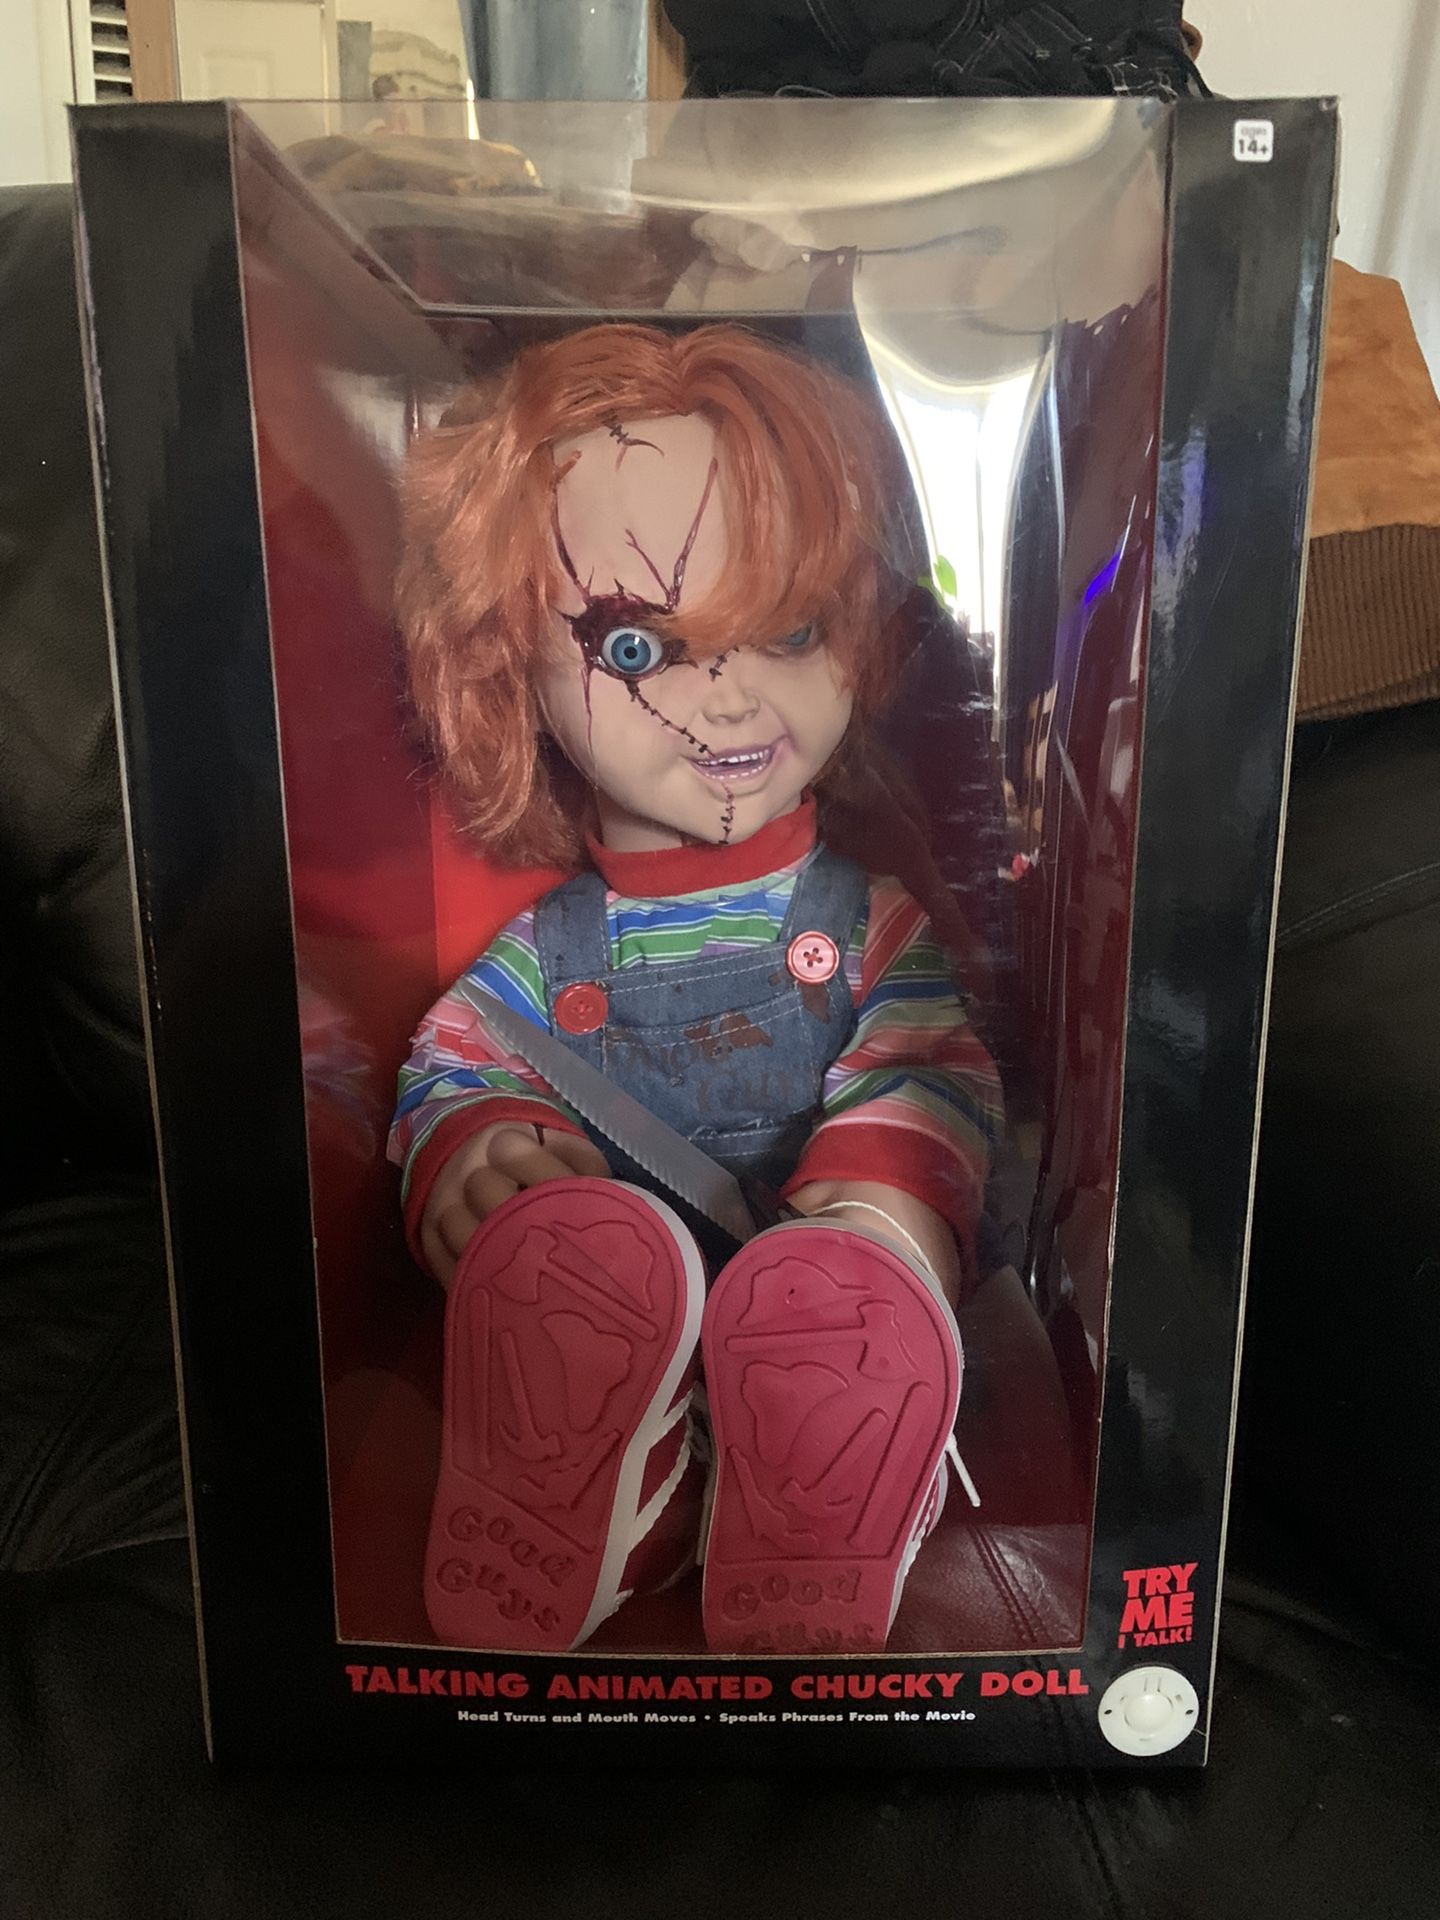 NEW AND MINT CONDITION ANIMATED TALKING CHUCKY DOLL